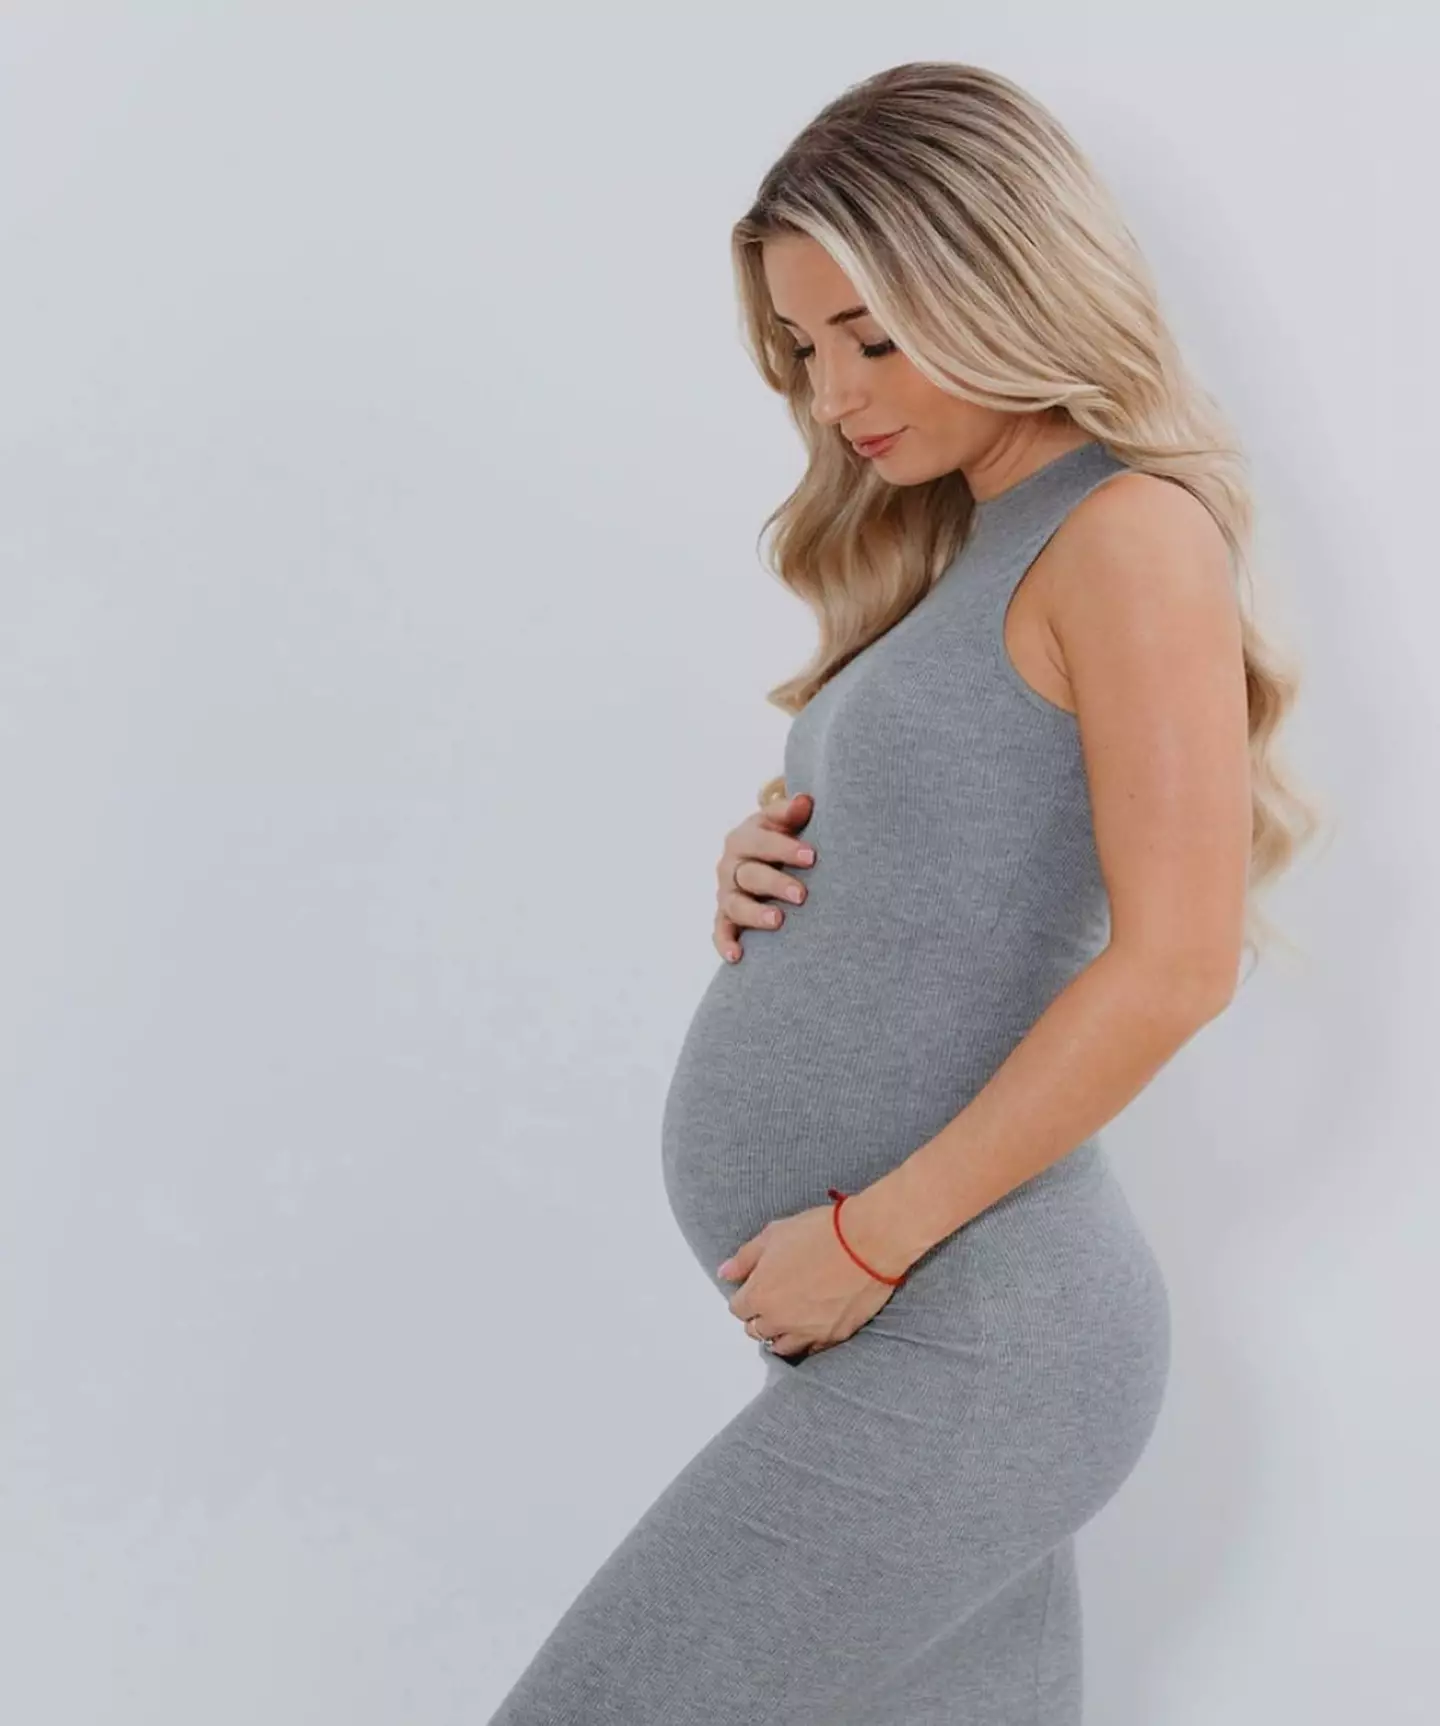 Dani has been keeping her followers updated with her pregnancy journey.